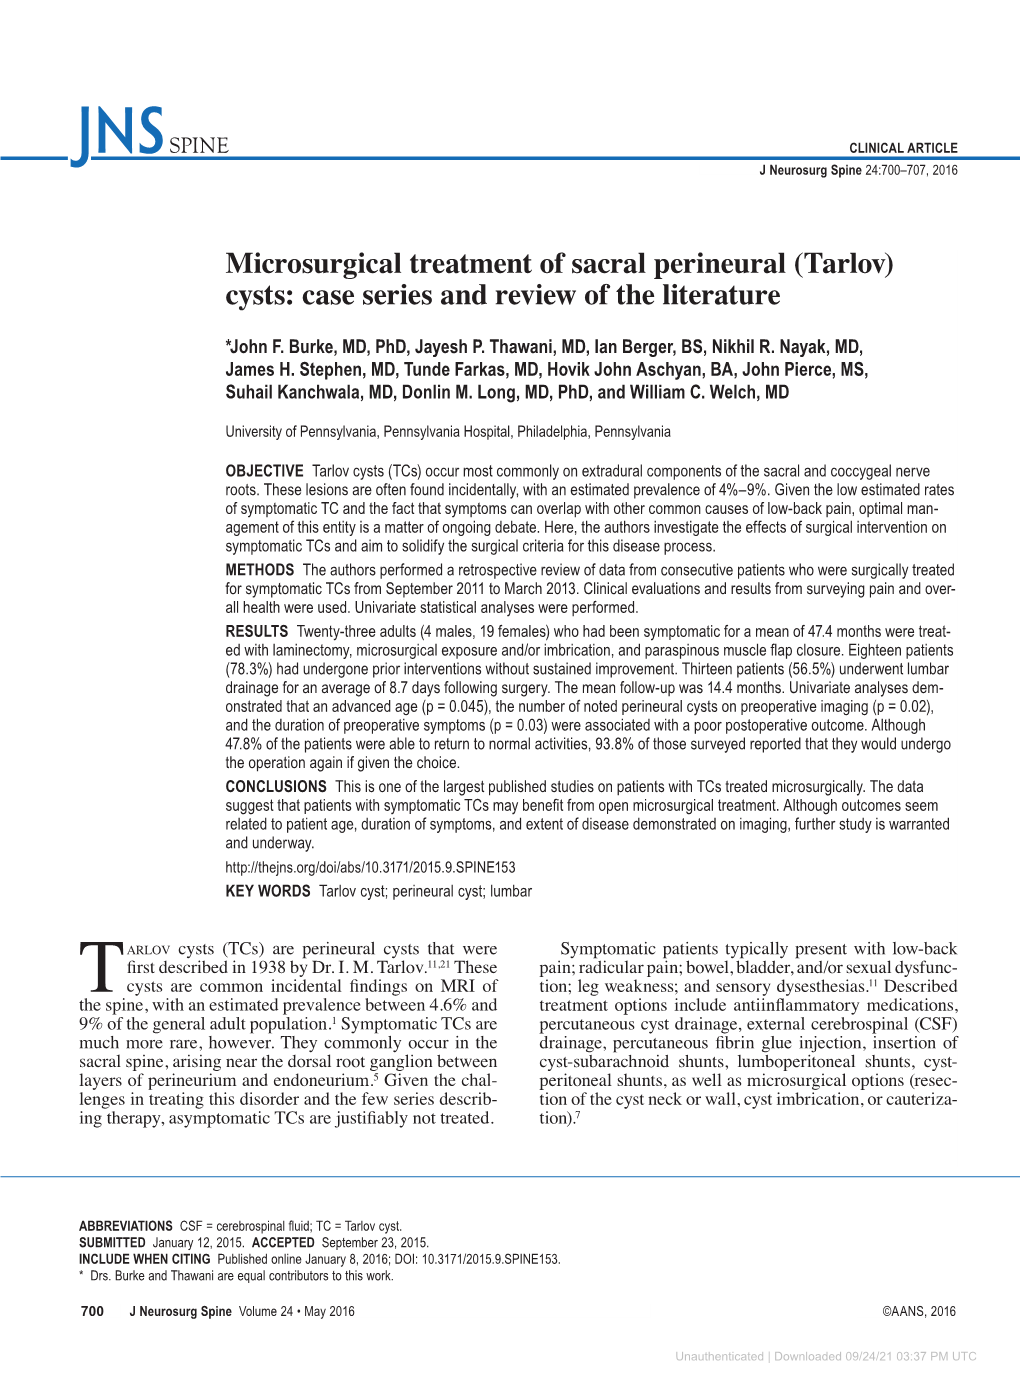 Microsurgical Treatment of Sacral Perineural (Tarlov) Cysts: Case Series and Review of the Literature